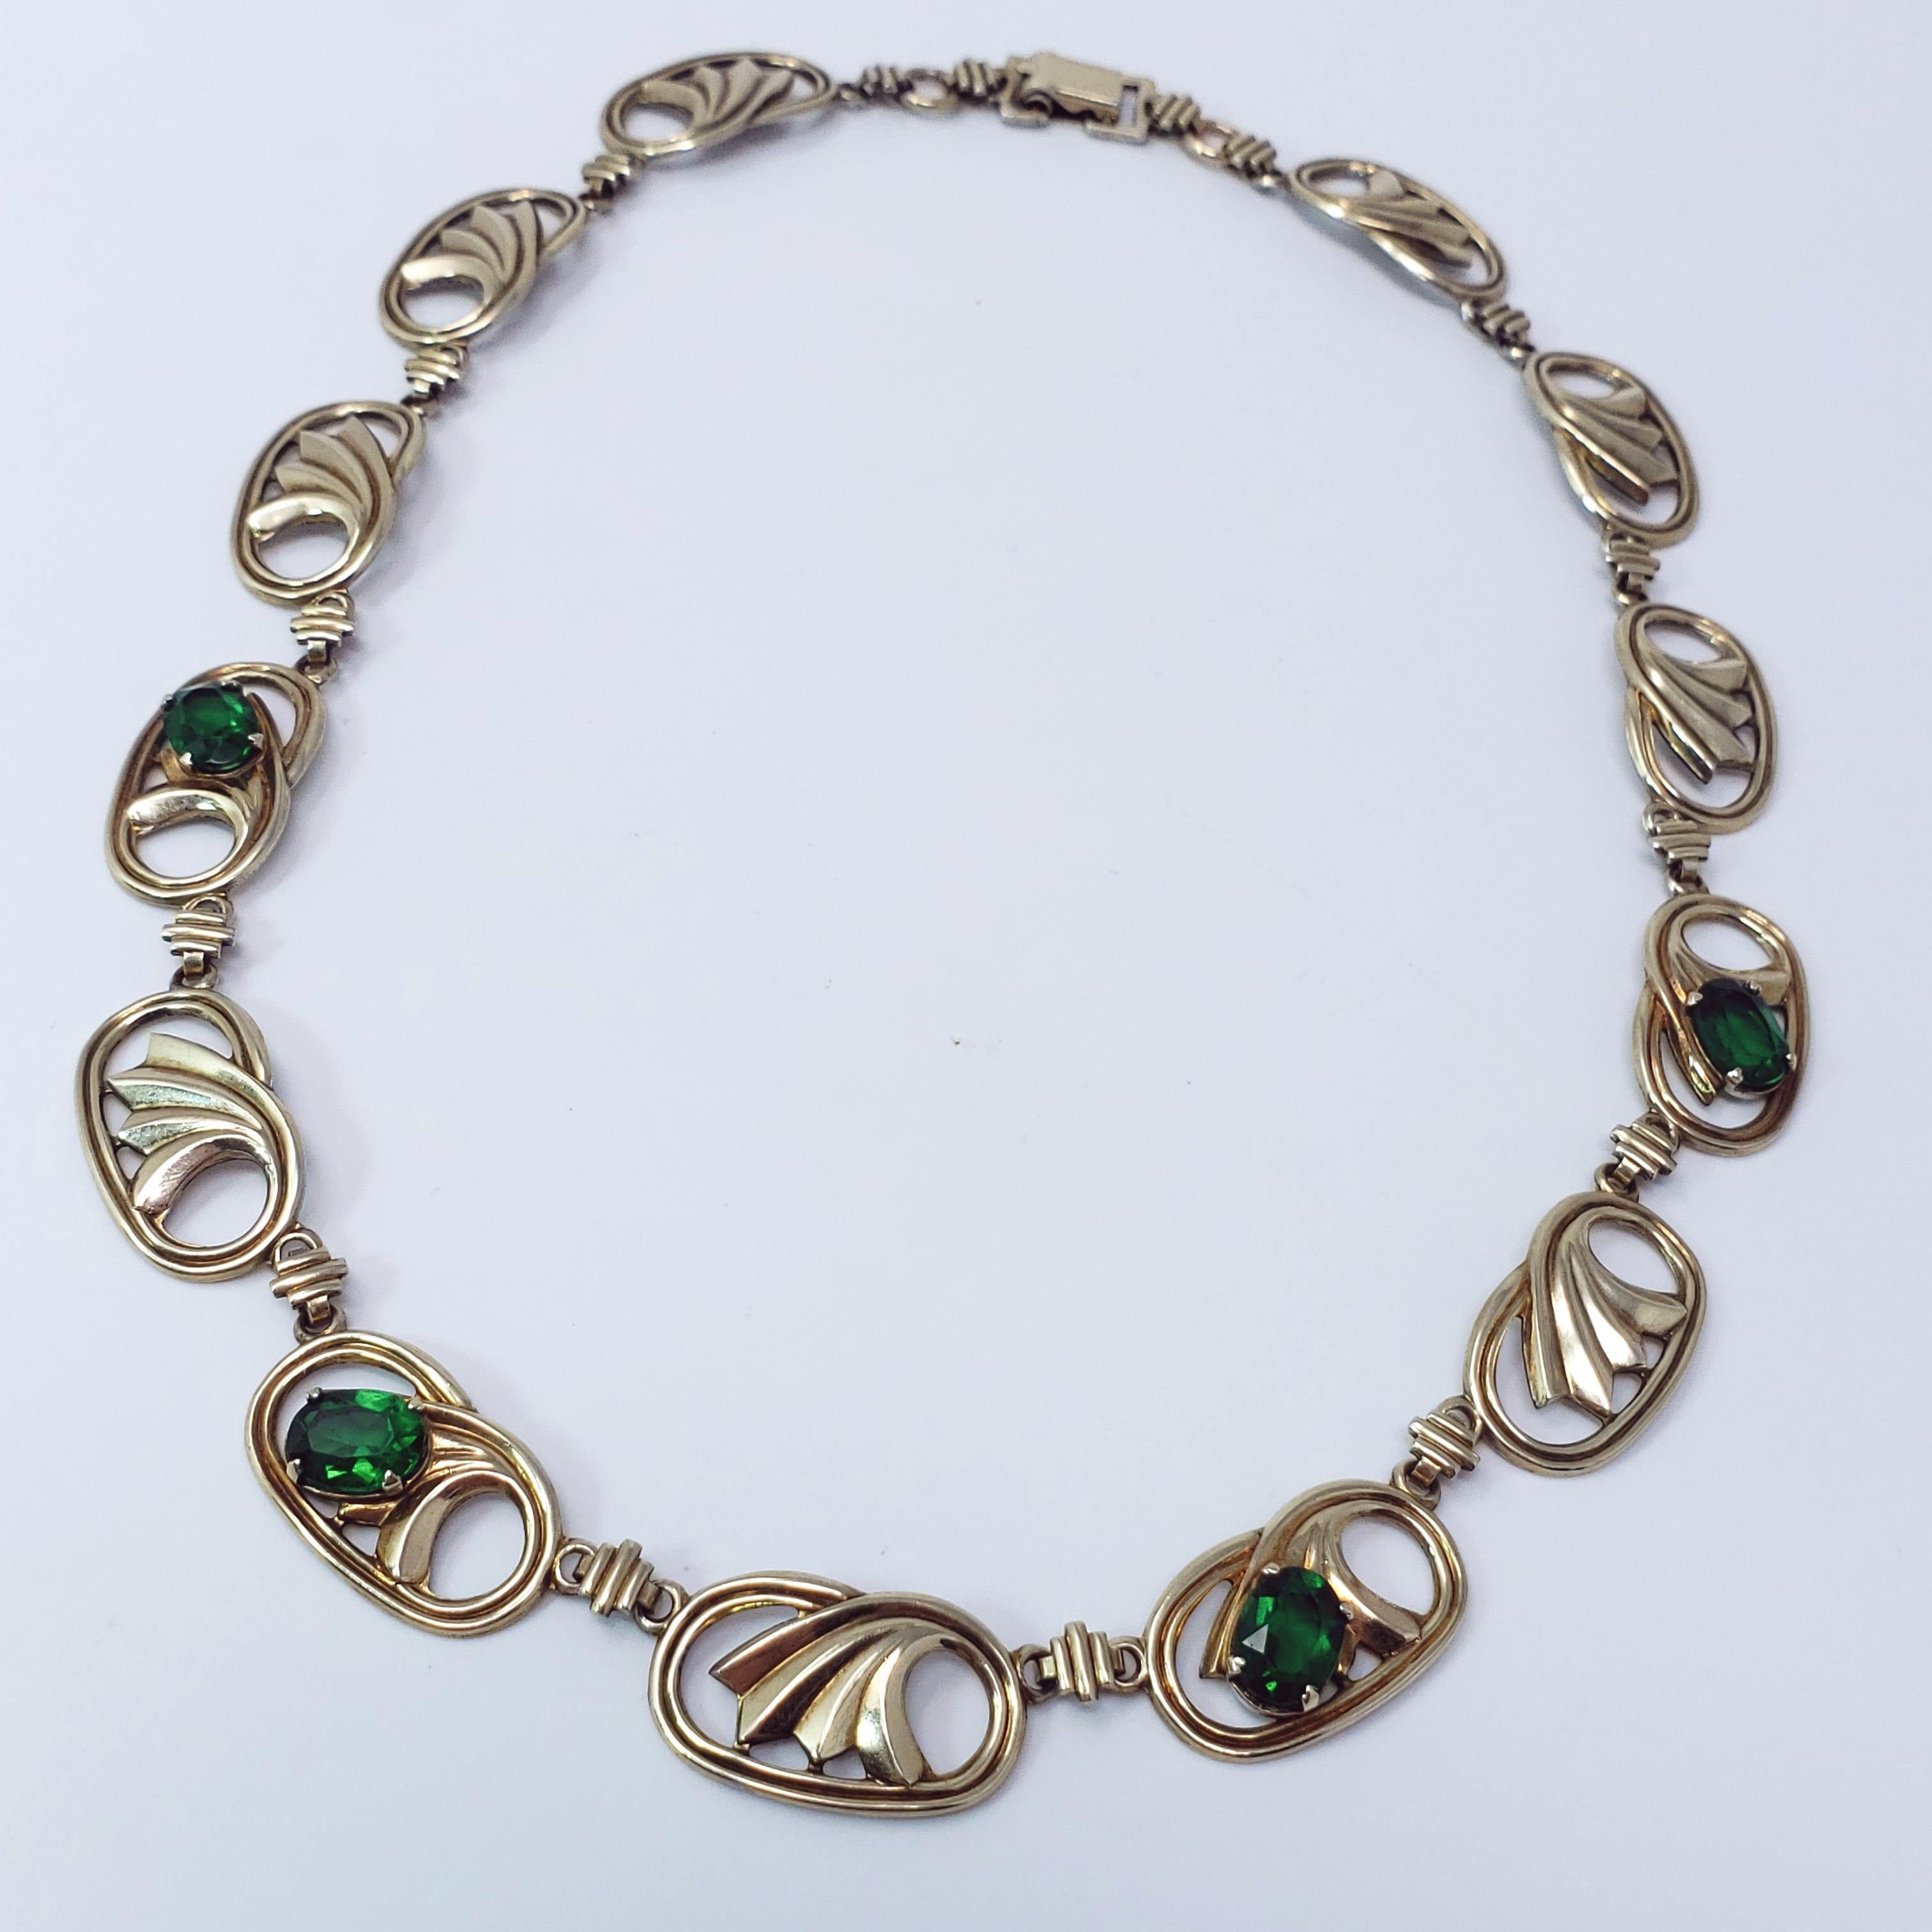 A vintage choker by Symmetalic. 14K gold plating on the front, sterling silver base links accented with green, emerald-colored faceted crystals in prong settings. A luxurious look. Made in the USA circa mid 1900s, with clear Edwardian